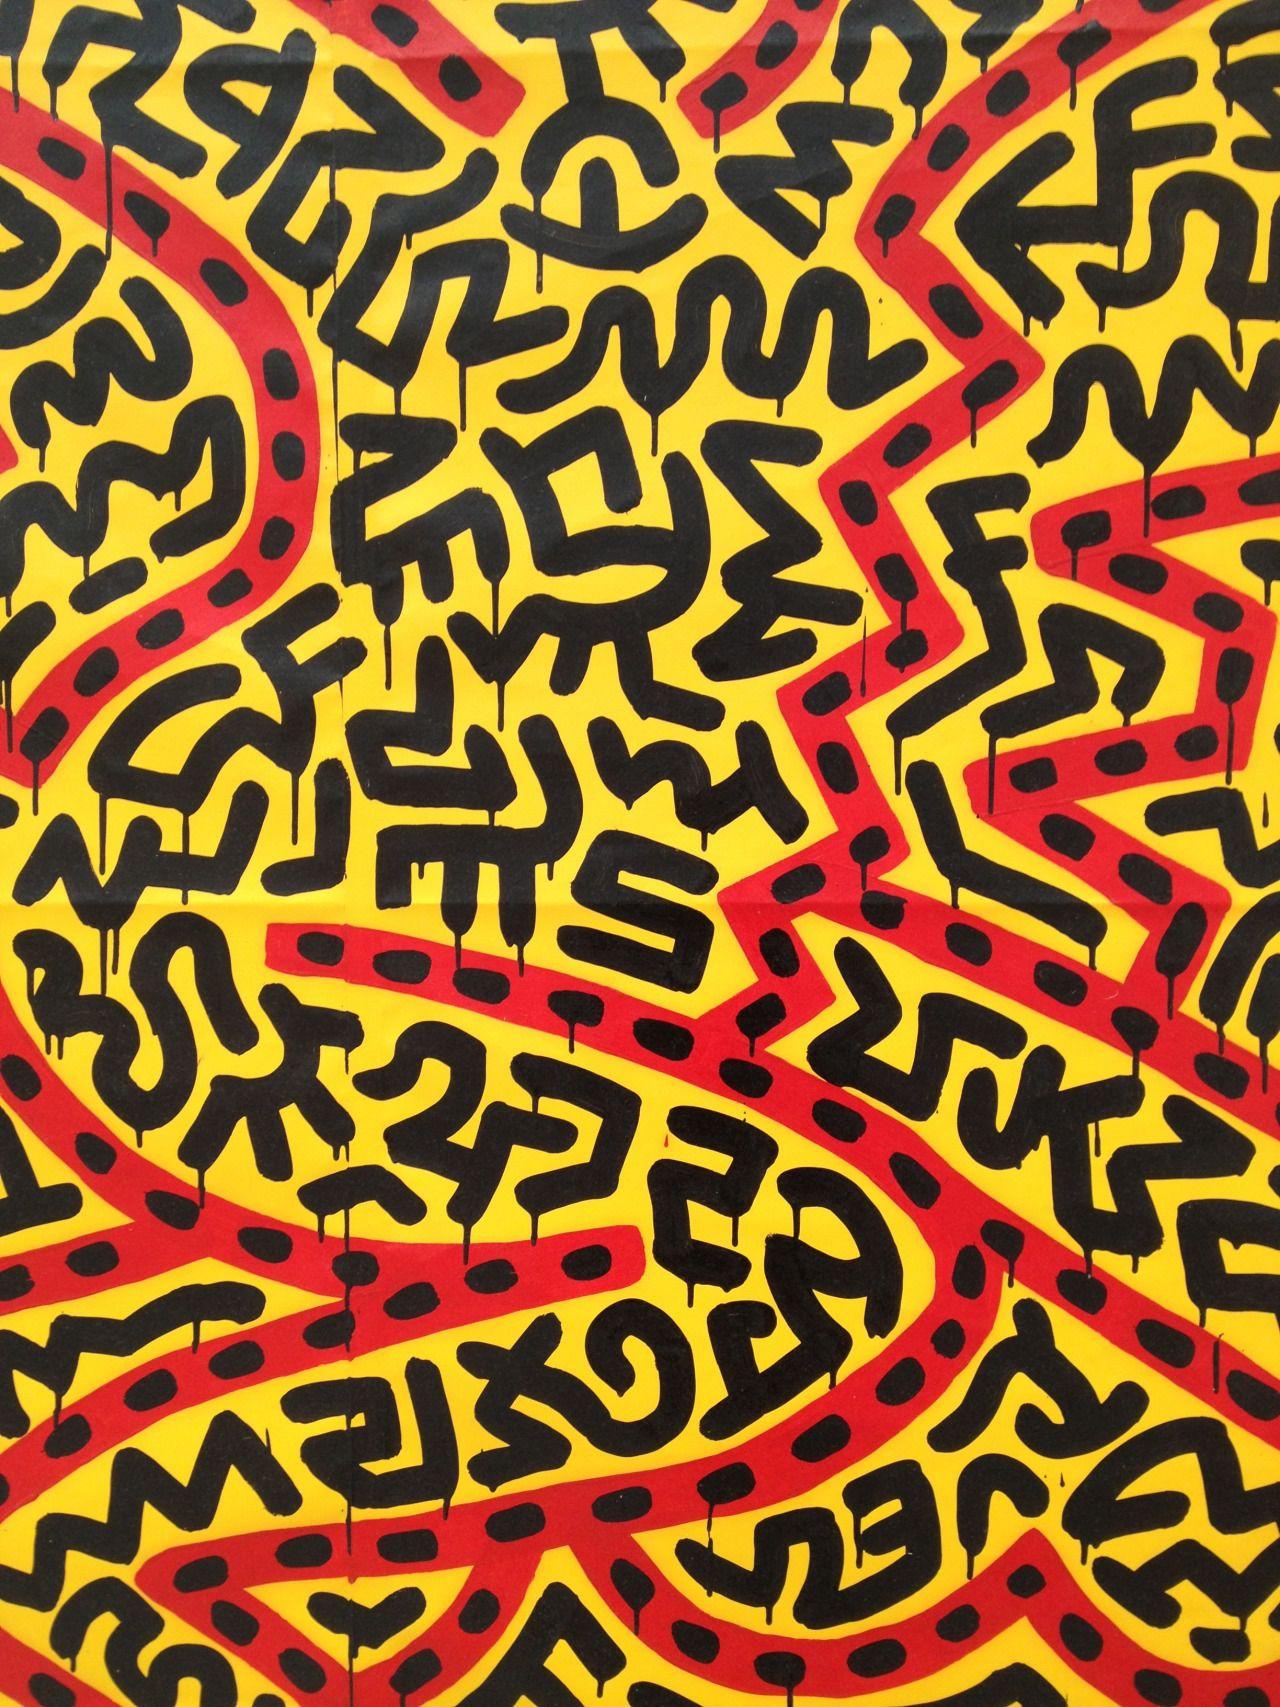 Keith haring slip and slide